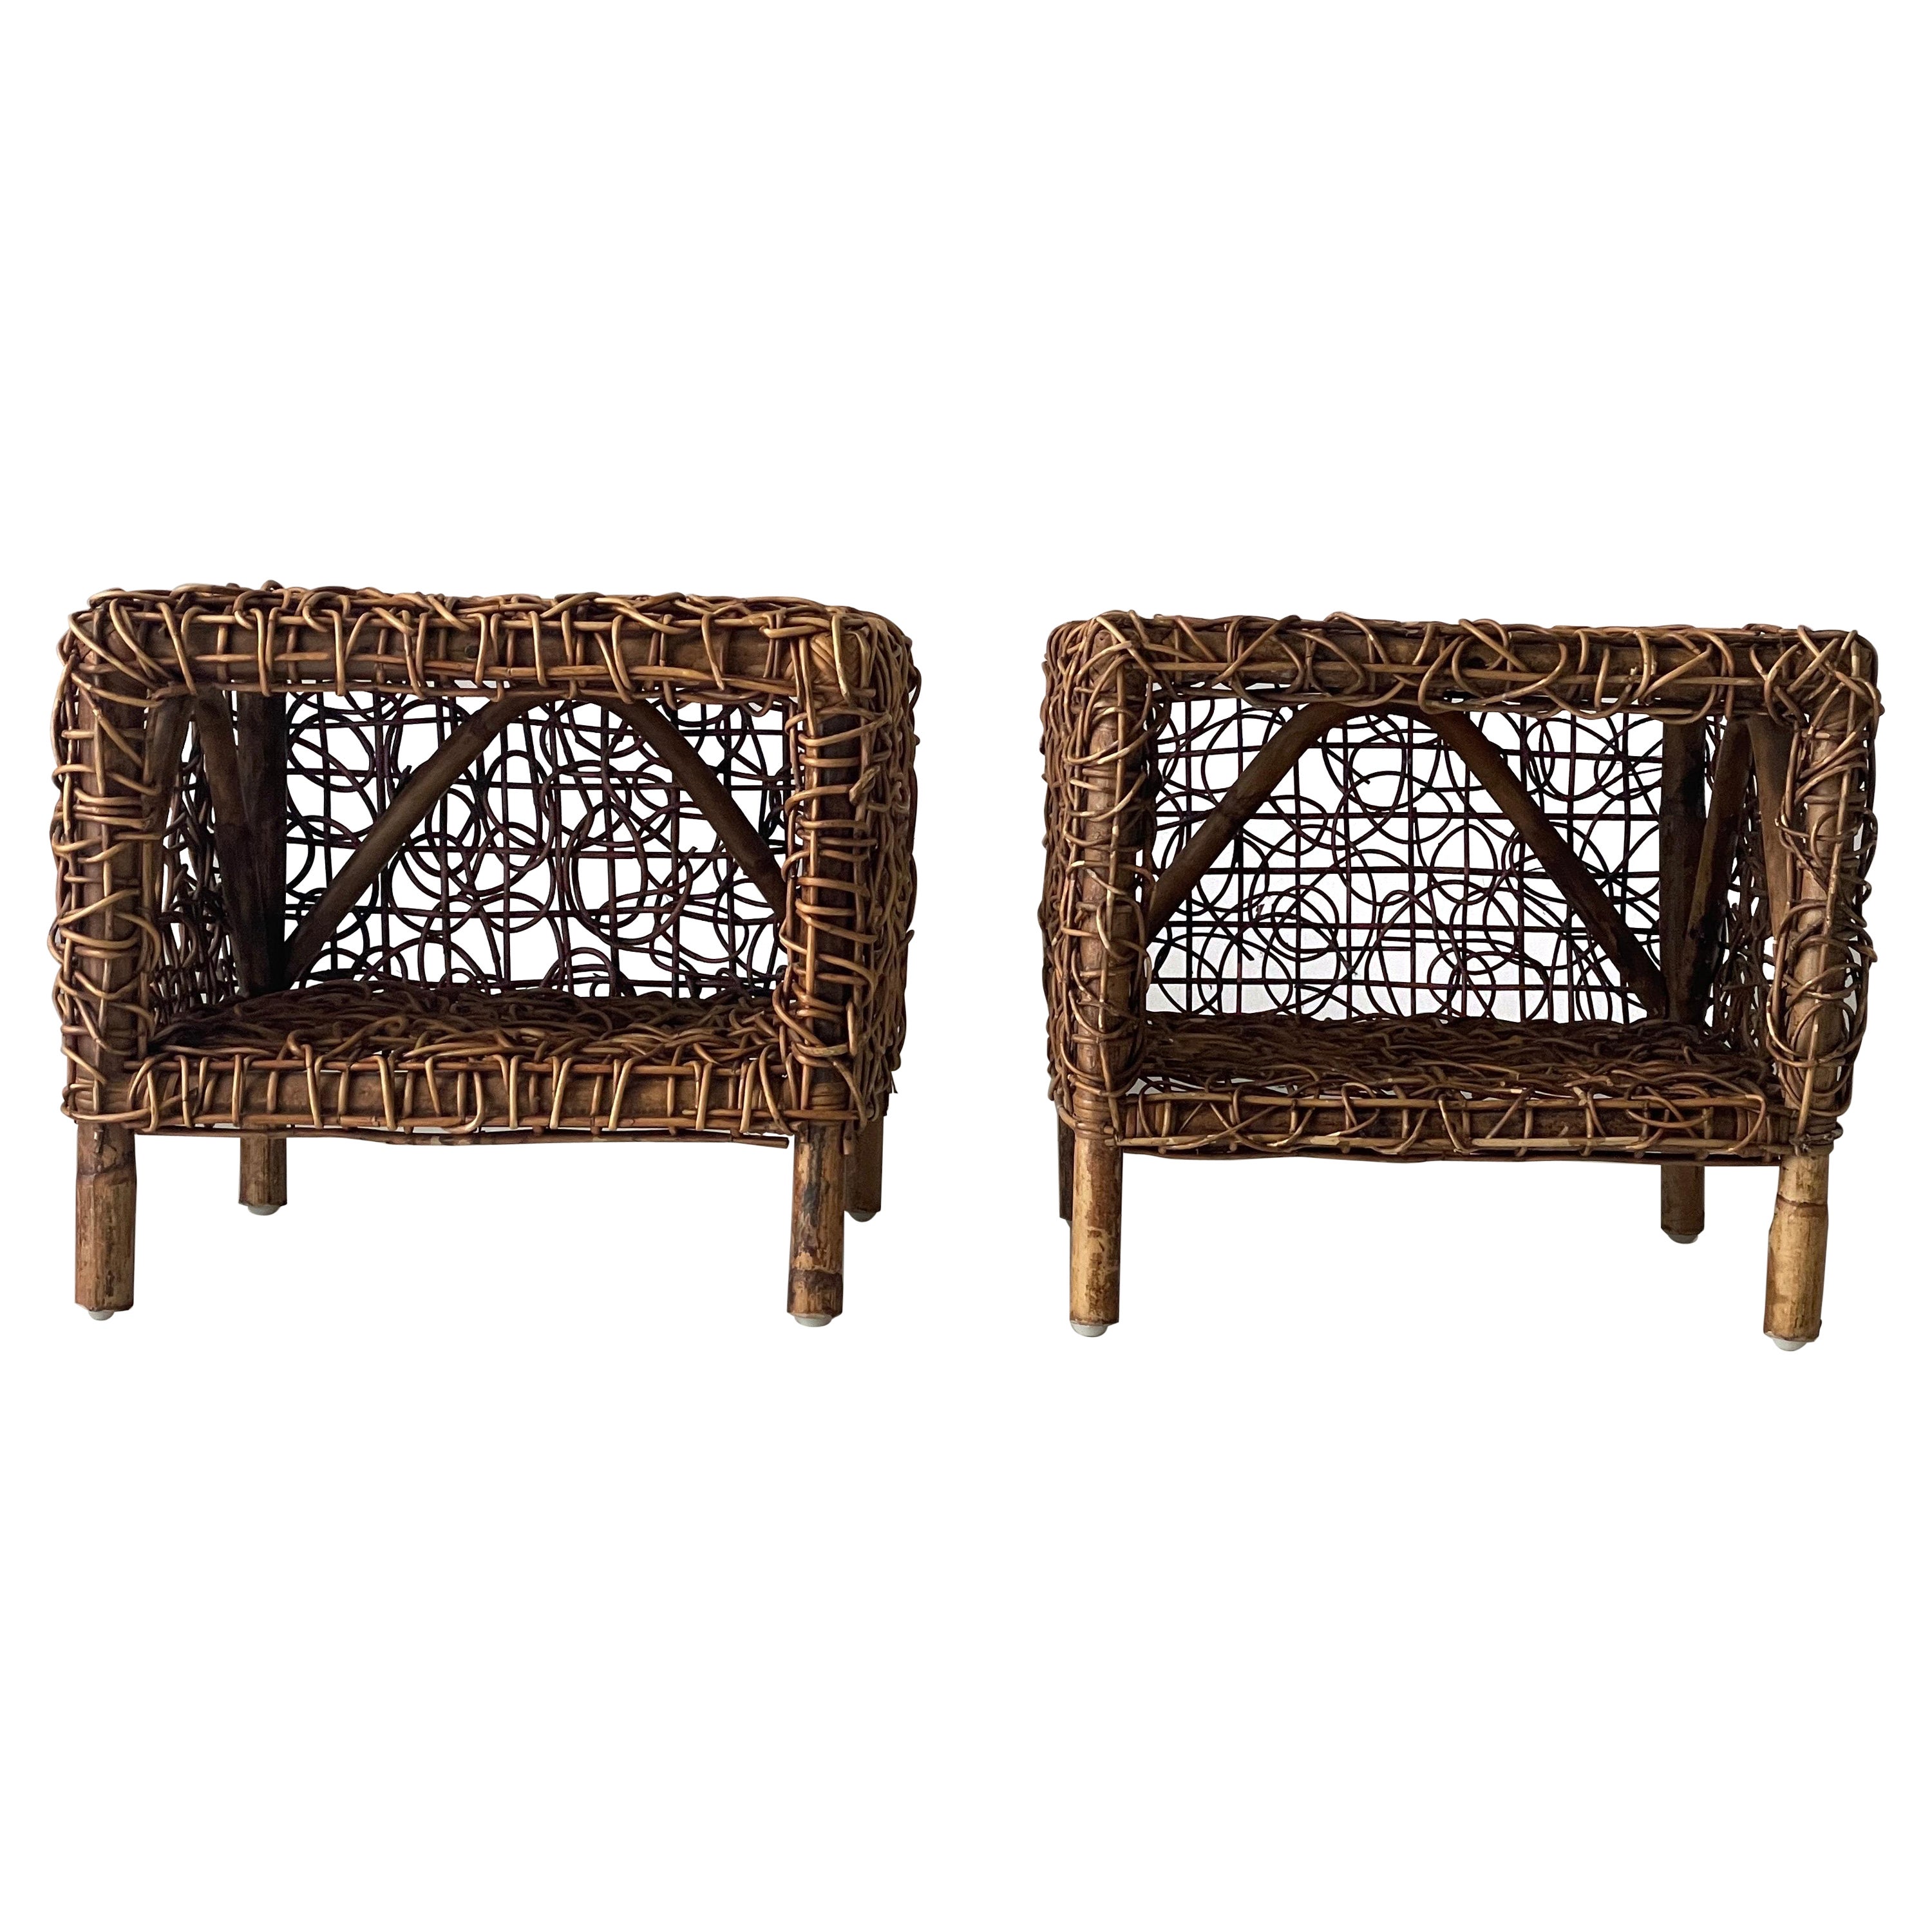 Unusual Design Woven Bamboo Pair of Bedside Tables, 1960s, Italy